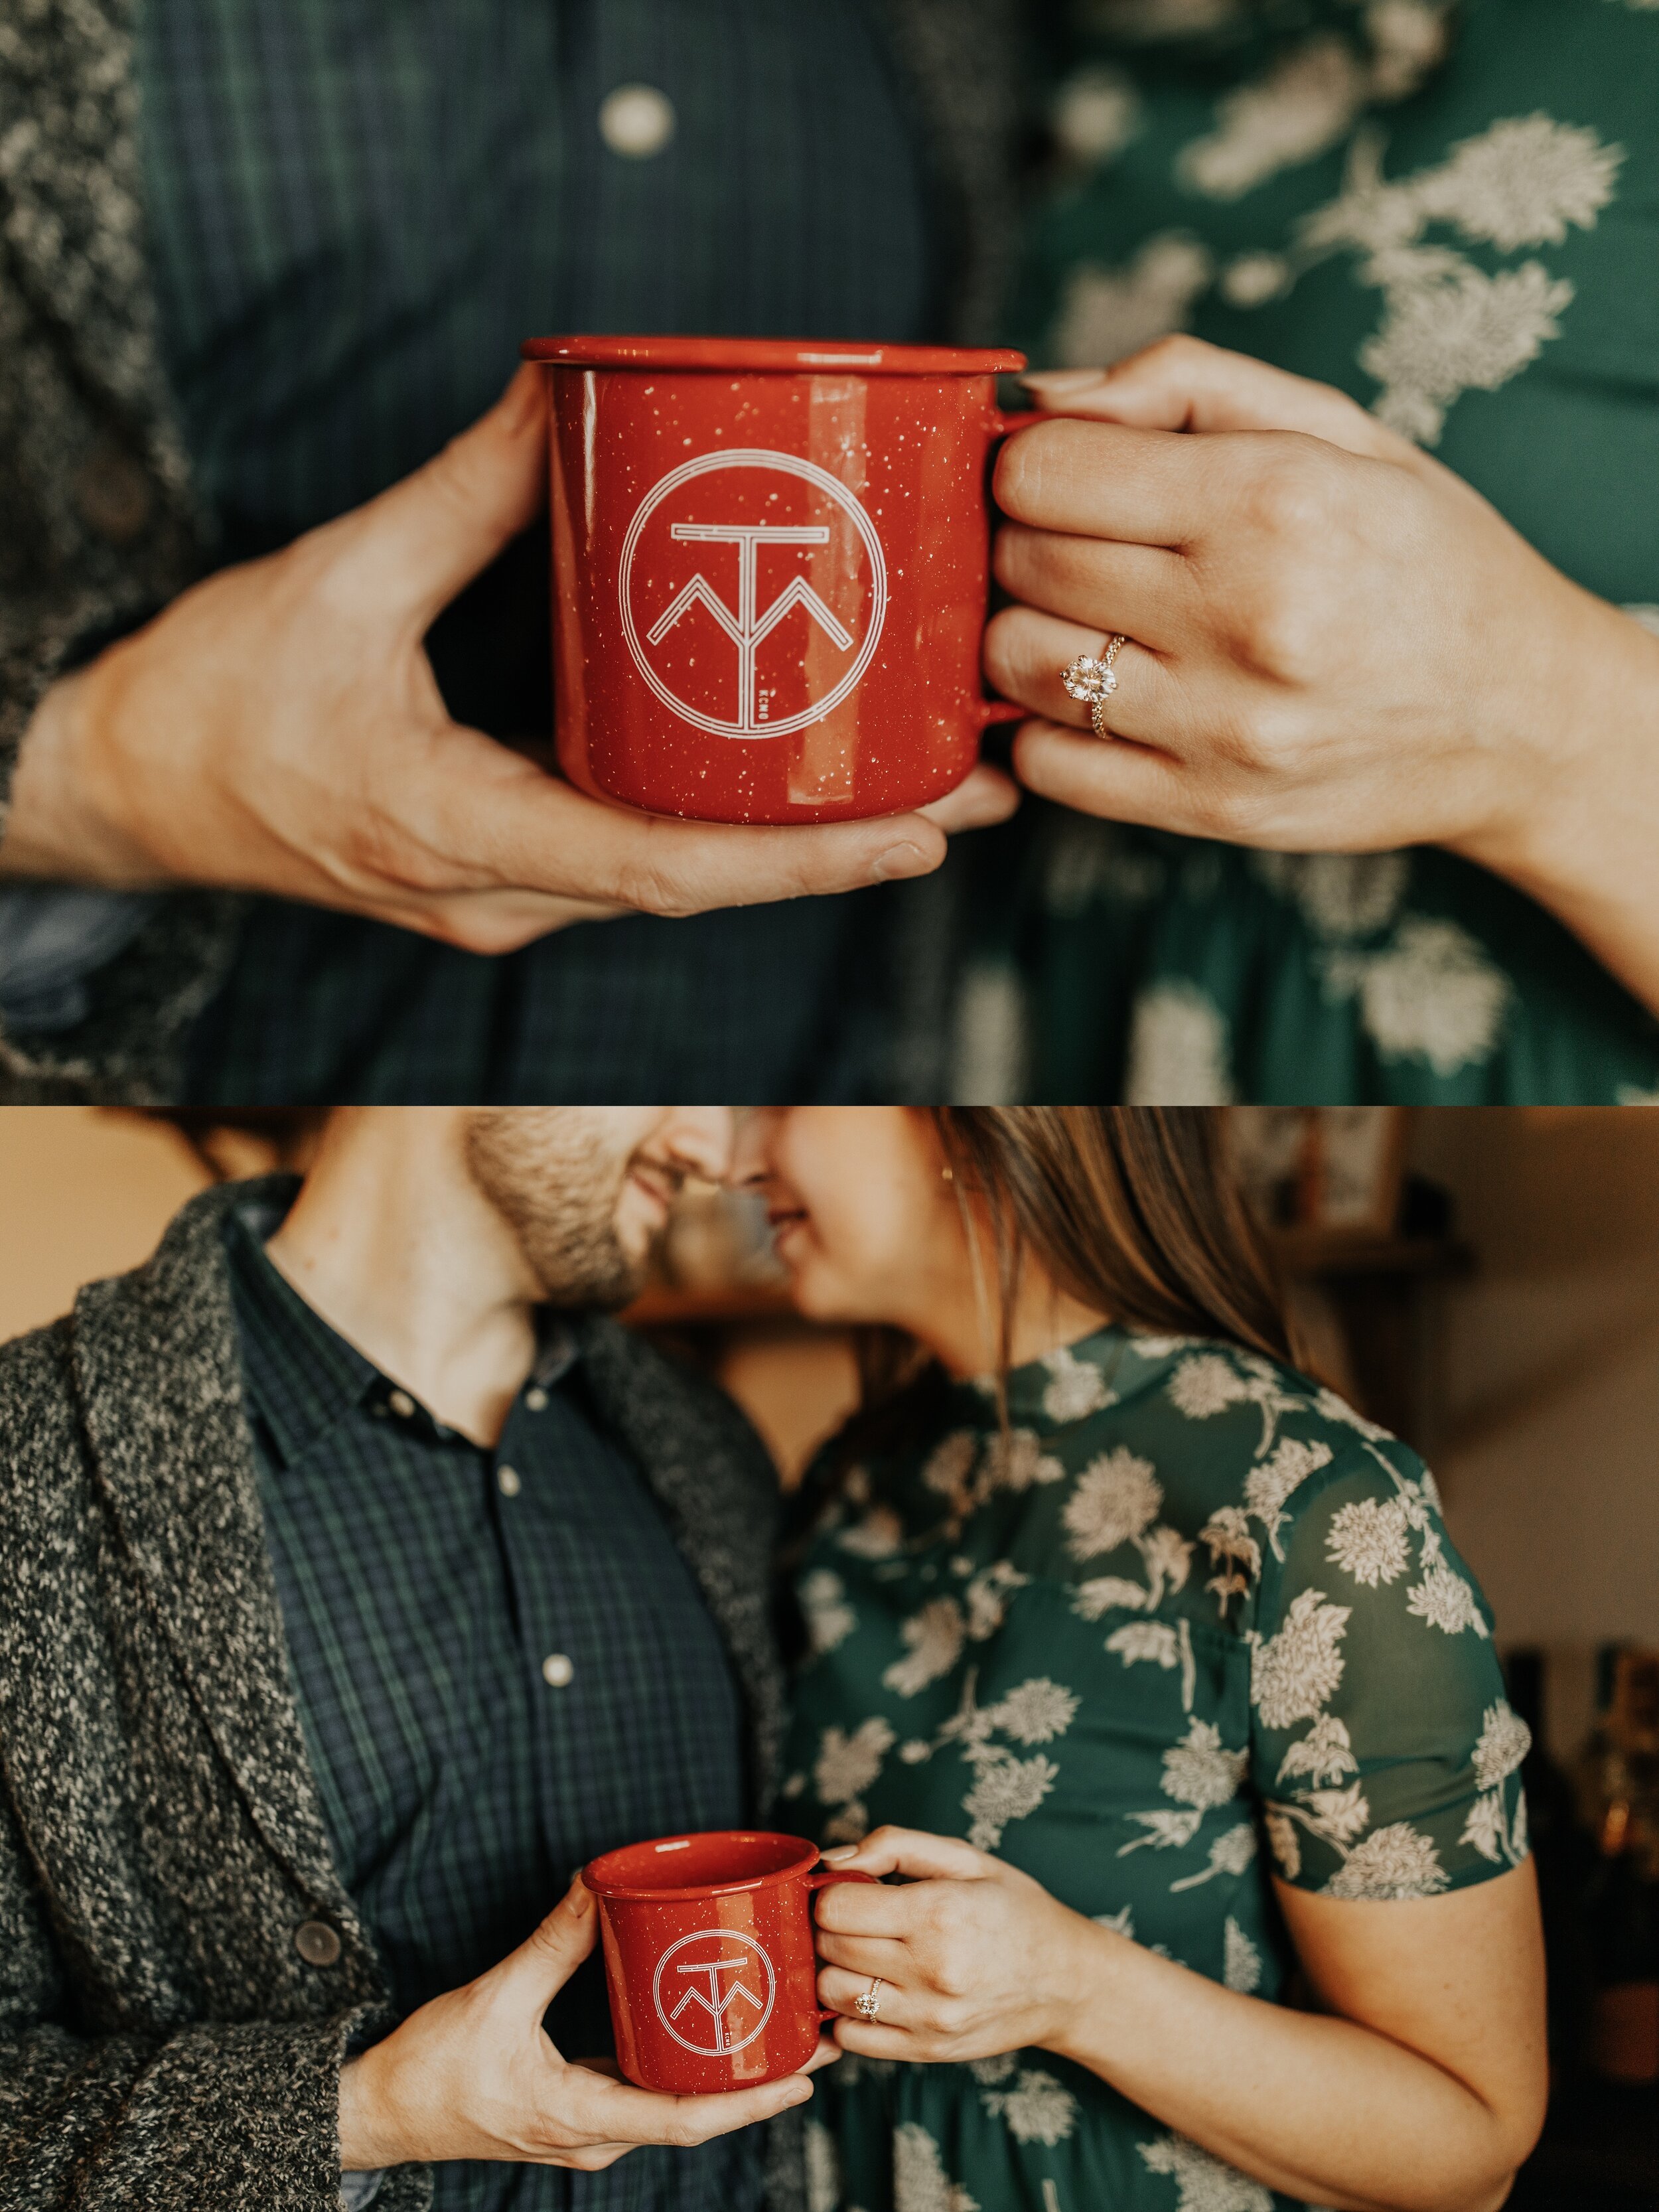 jessika-christine-photography-in+home-engagement-couples-cozy-adventurous-session (7).jpg